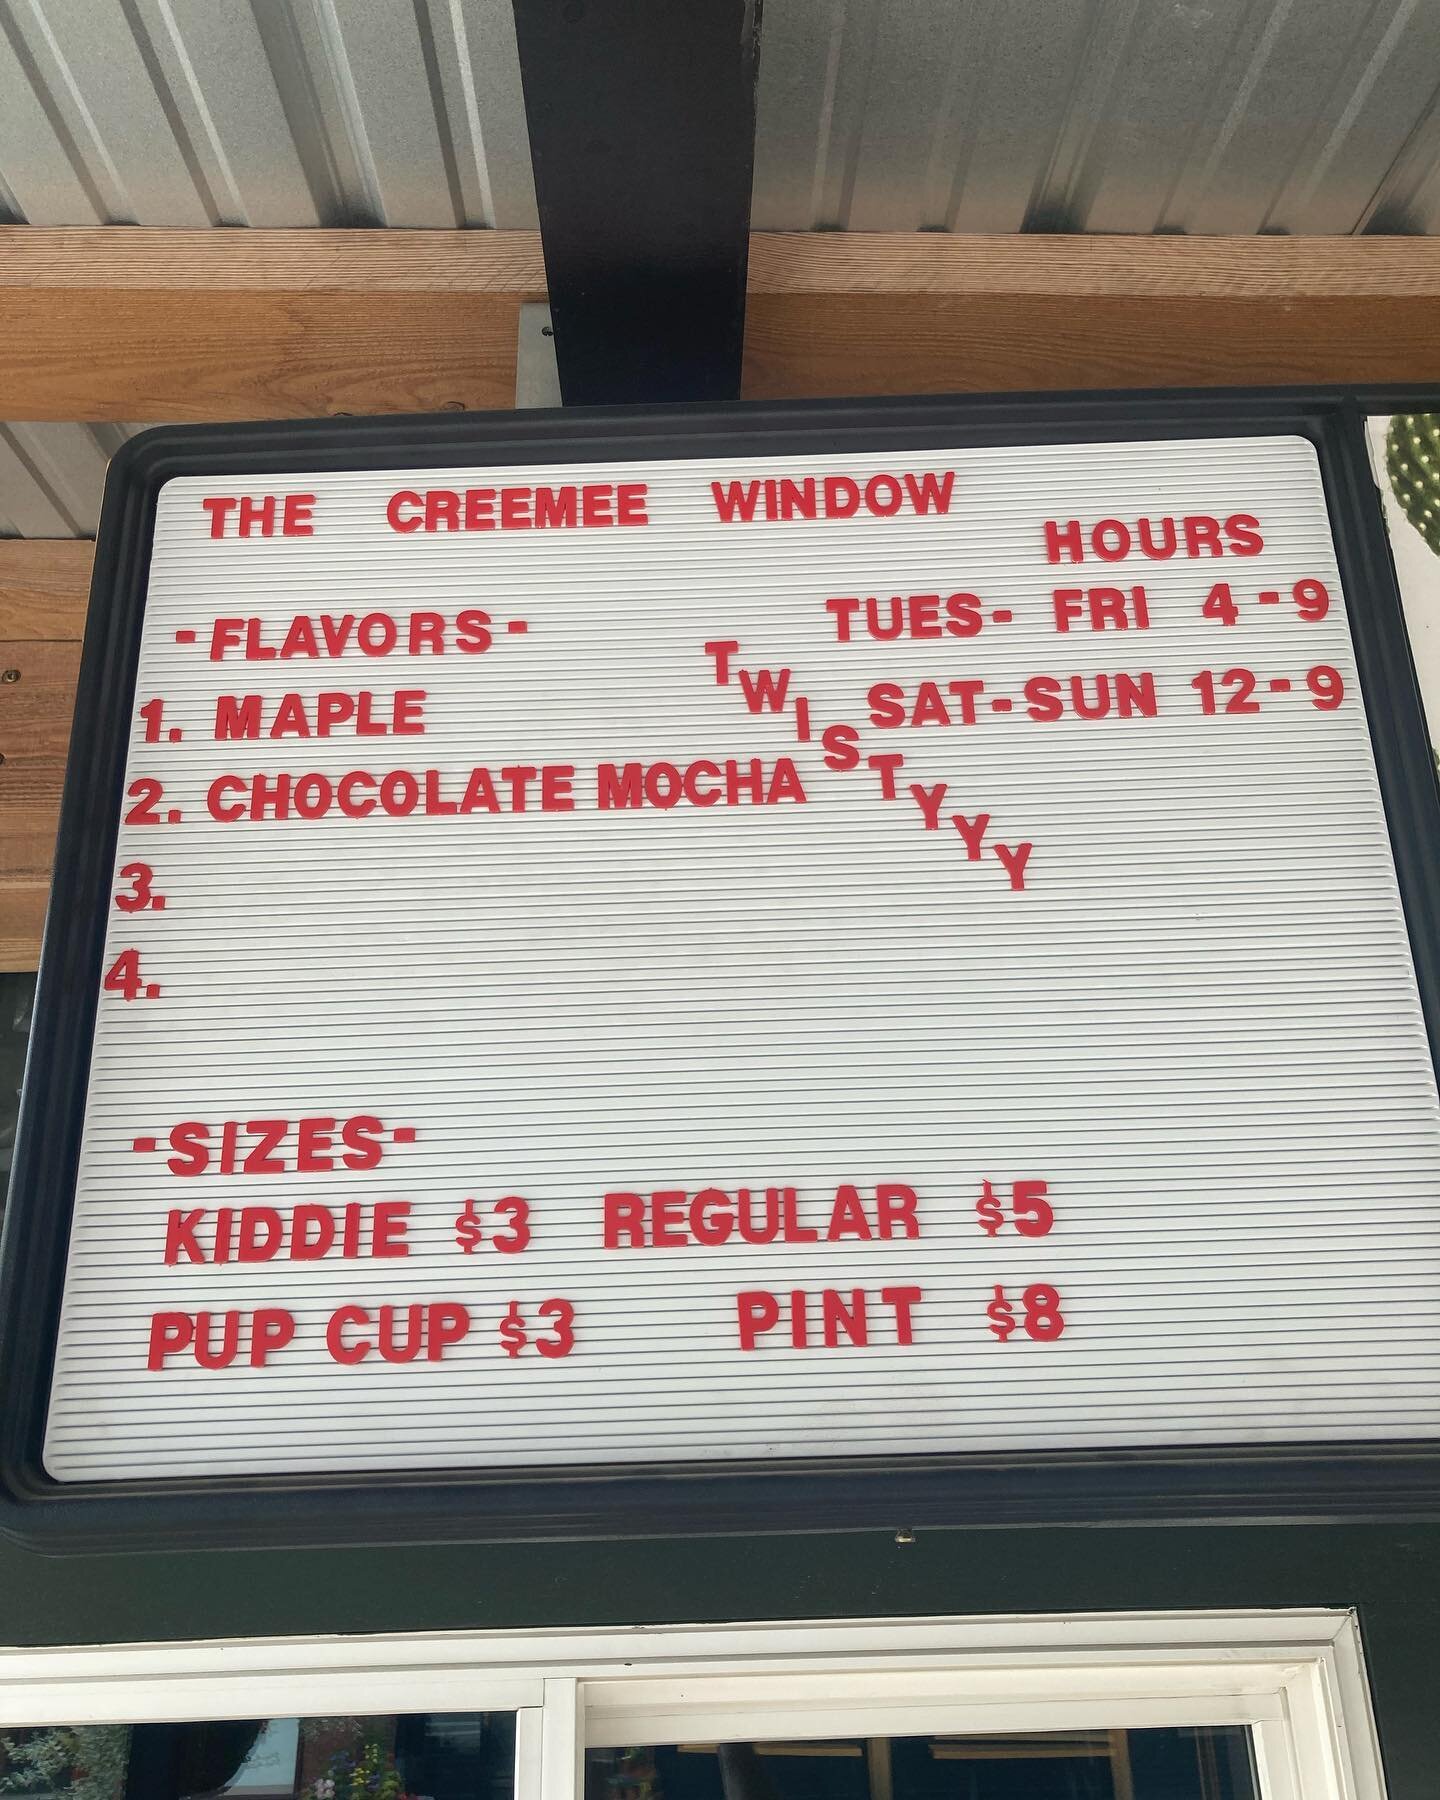 Special Holiday Hours- The Creemee Window will be open on July 4th from 9:30 am until 7:00 pm.  Have a happy and safe holiday. 🍦❤️🙌🎆